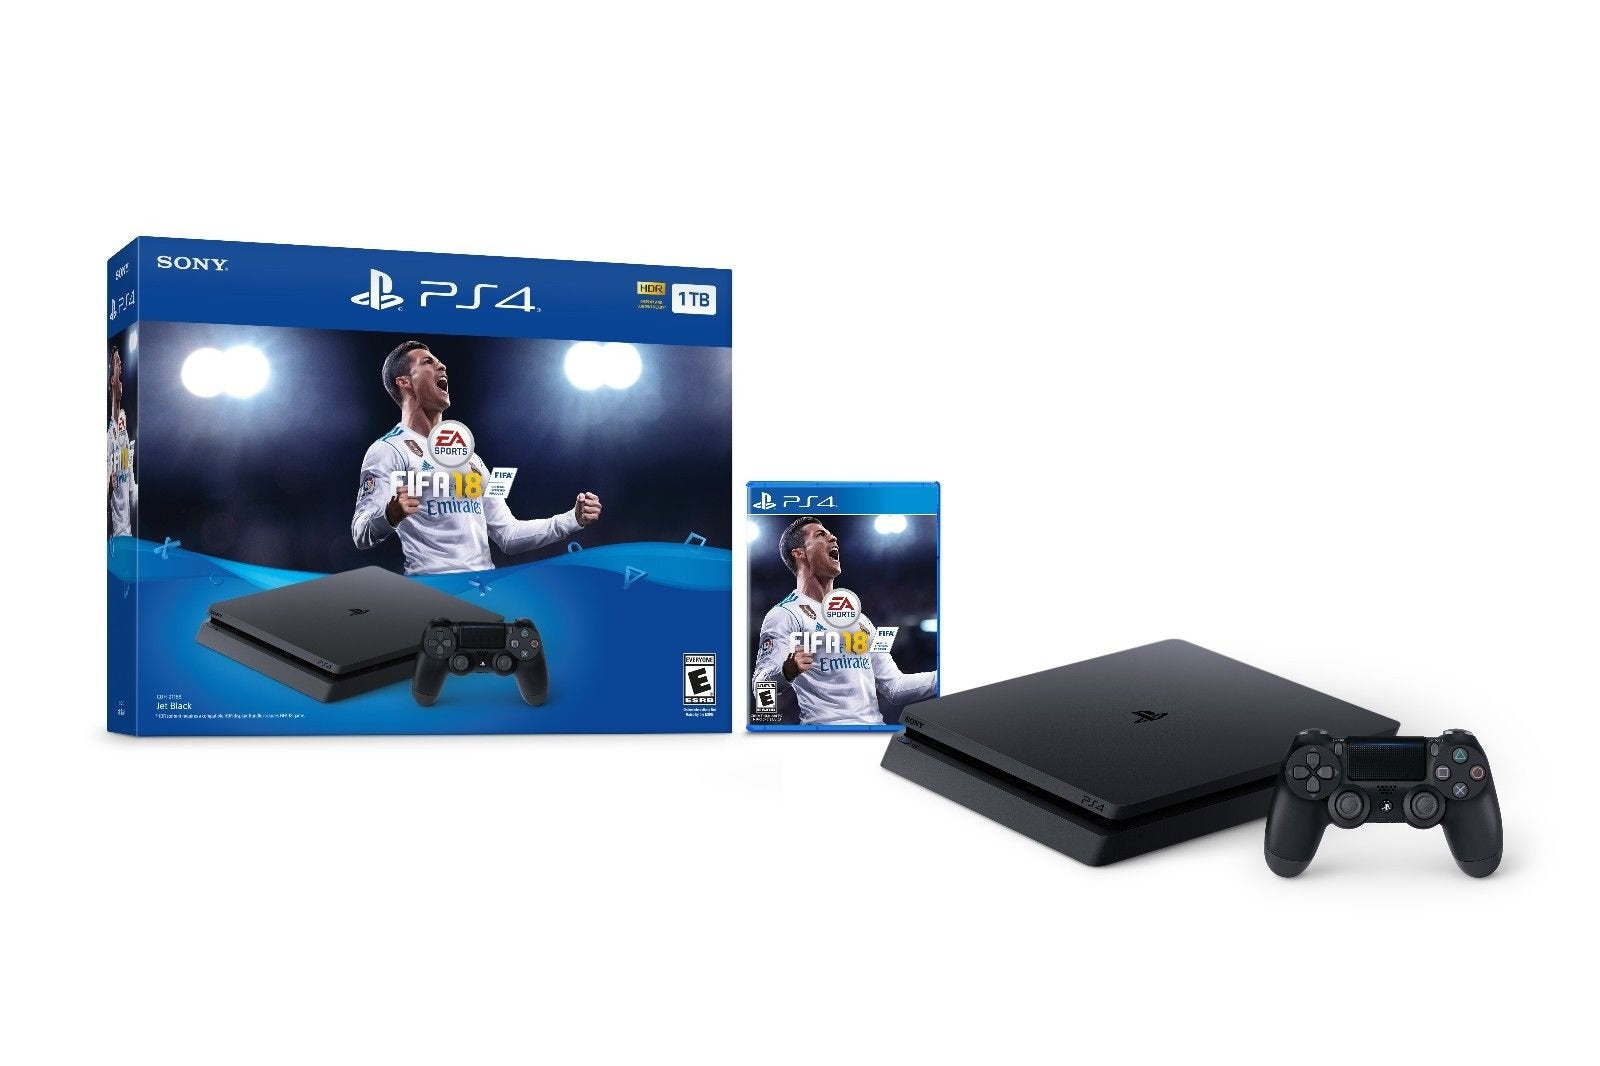 SONY PlayStation 4 Slim 1TB Console System with FIFA 18 Ultimate Team Bundle Consoles Sony   